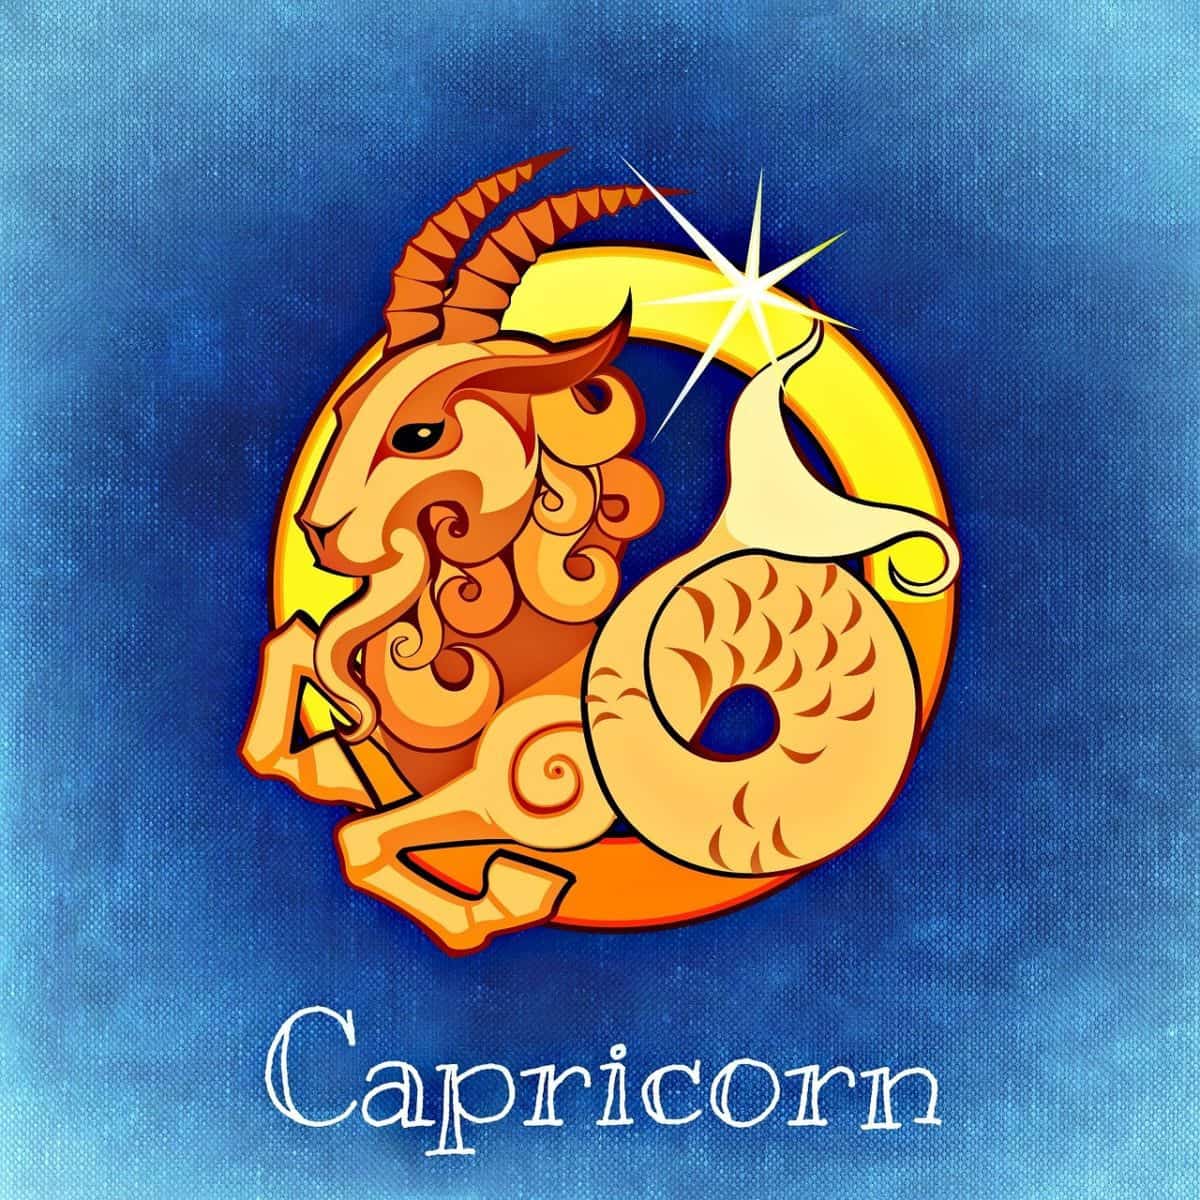 Say man a capricorn to what to Capricorn Men